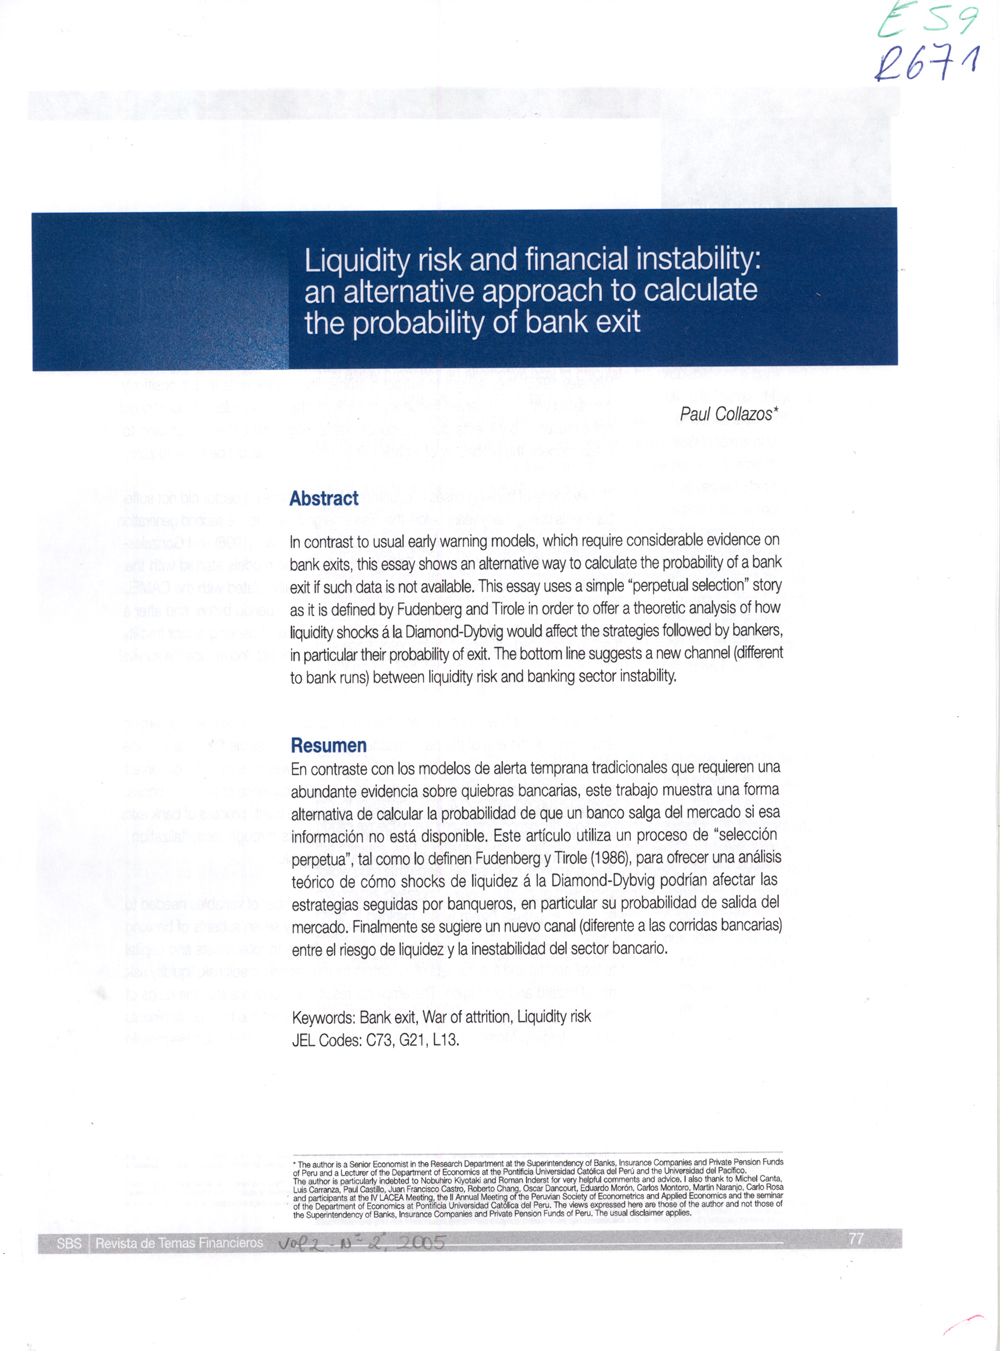 Imagen de la cubierta de Liquidity risk and financial instability: an alternative approach to calculate the probability of bank exit.